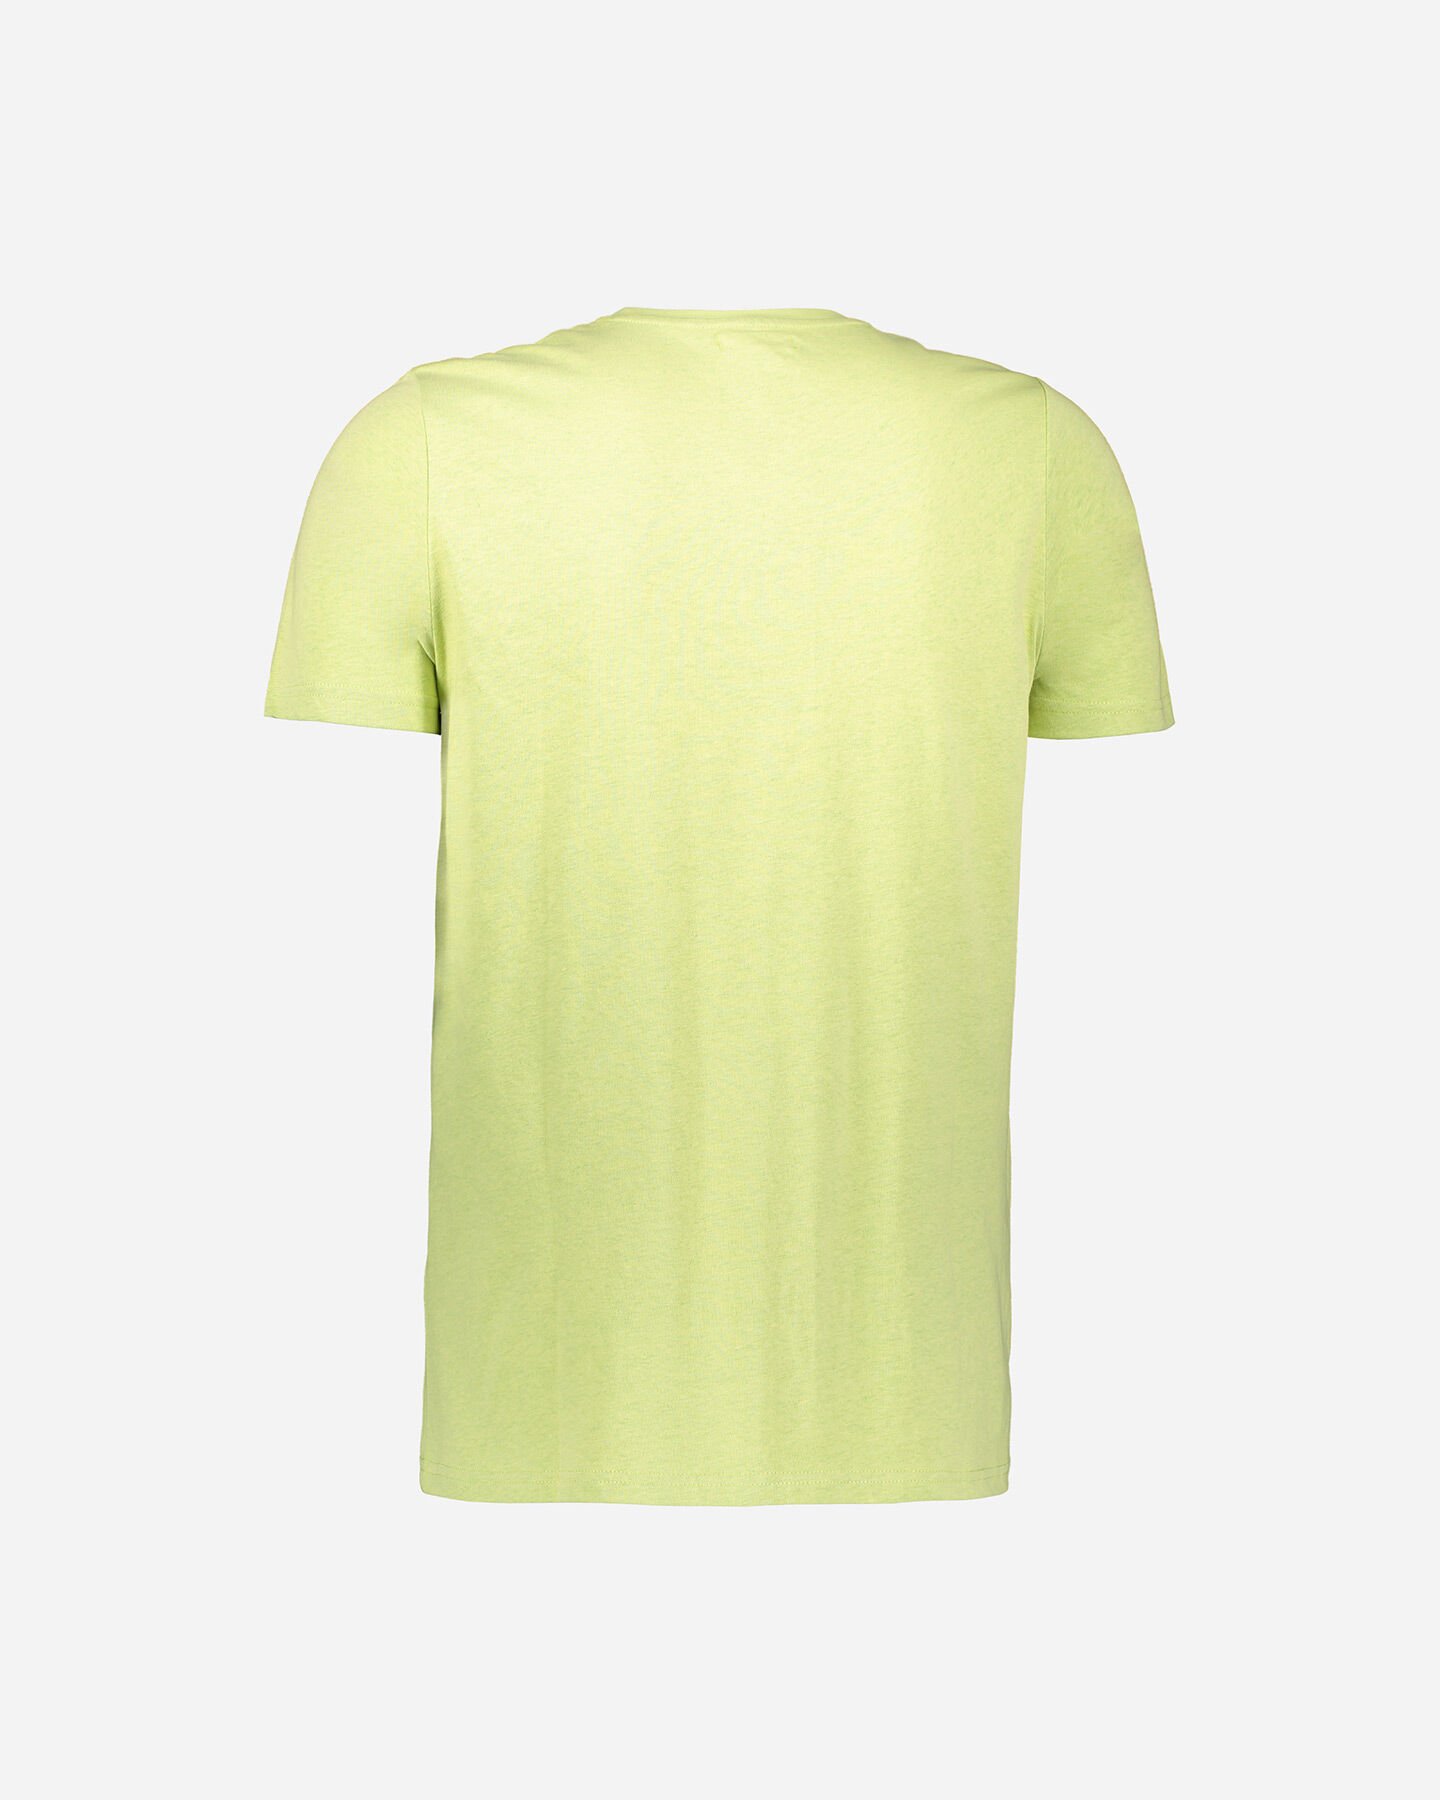  T-Shirt MISTRAL SURF M S4073905|176|XS scatto 1